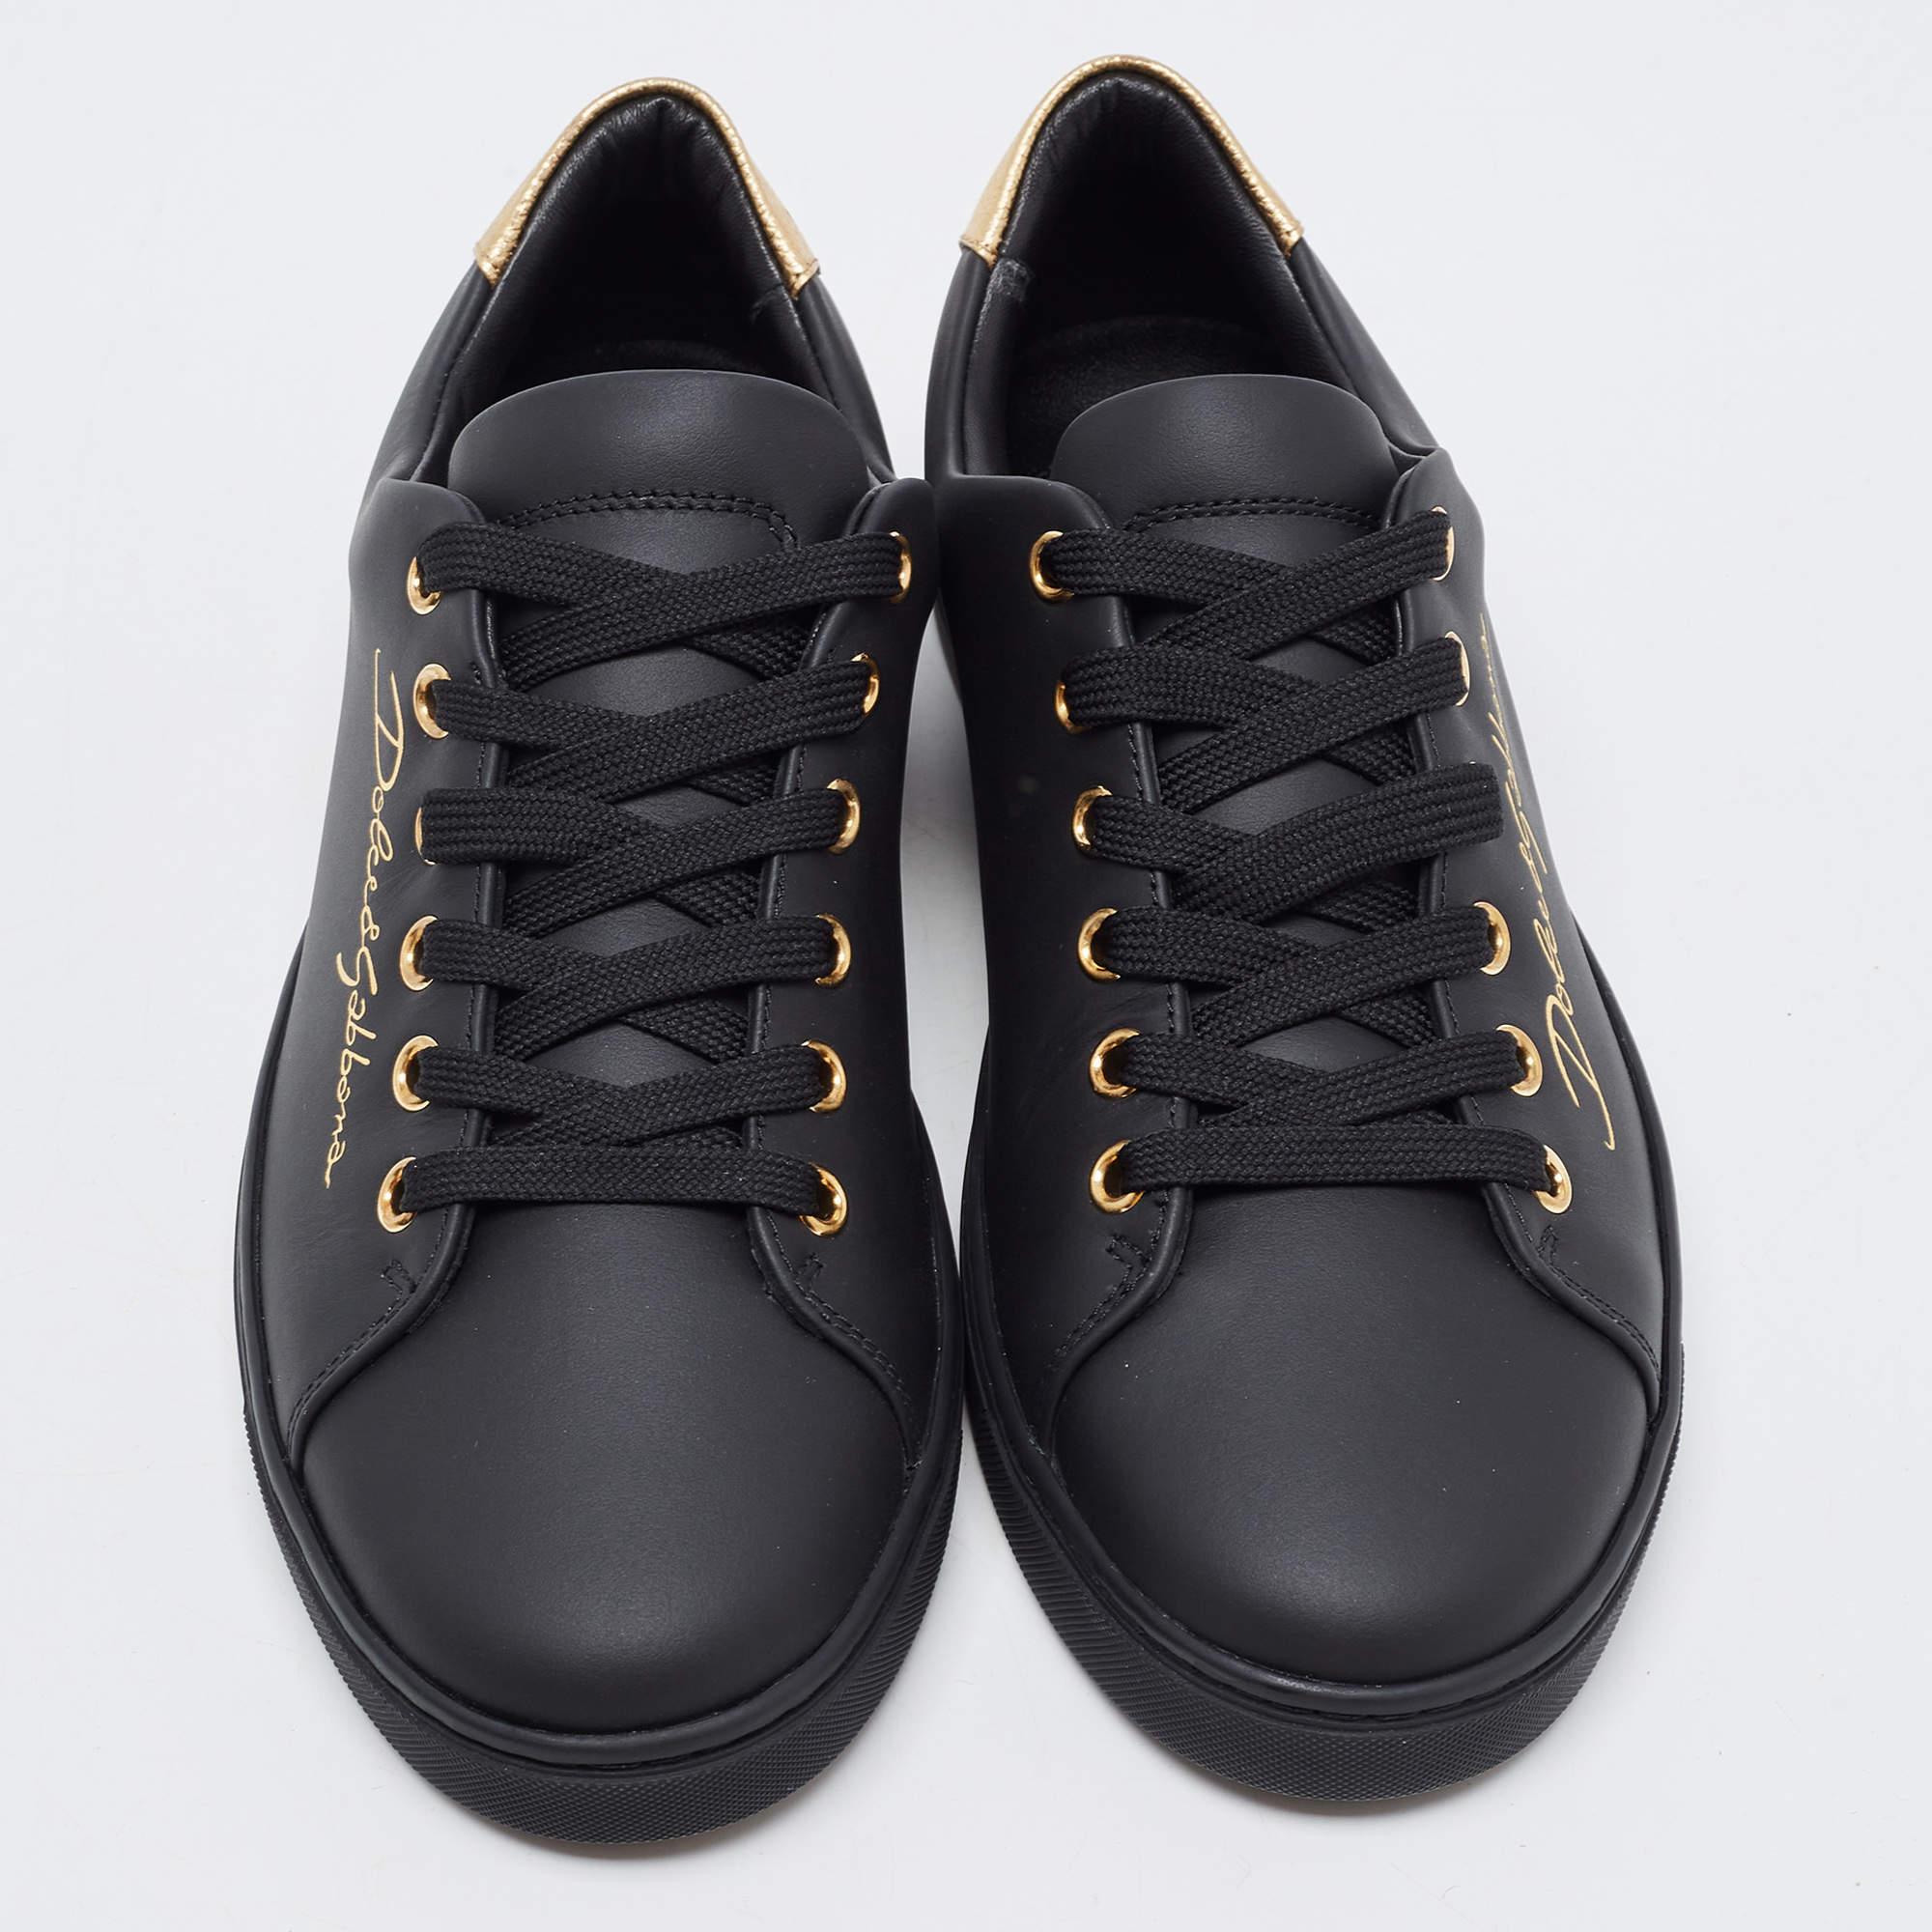 Coming in a classic silhouette, these Dolce & Gabbana sneakers are a seamless combination of luxury, comfort, and style. These sneakers are designed with signature details and comfortable insoles.

Includes
Original Dustbag